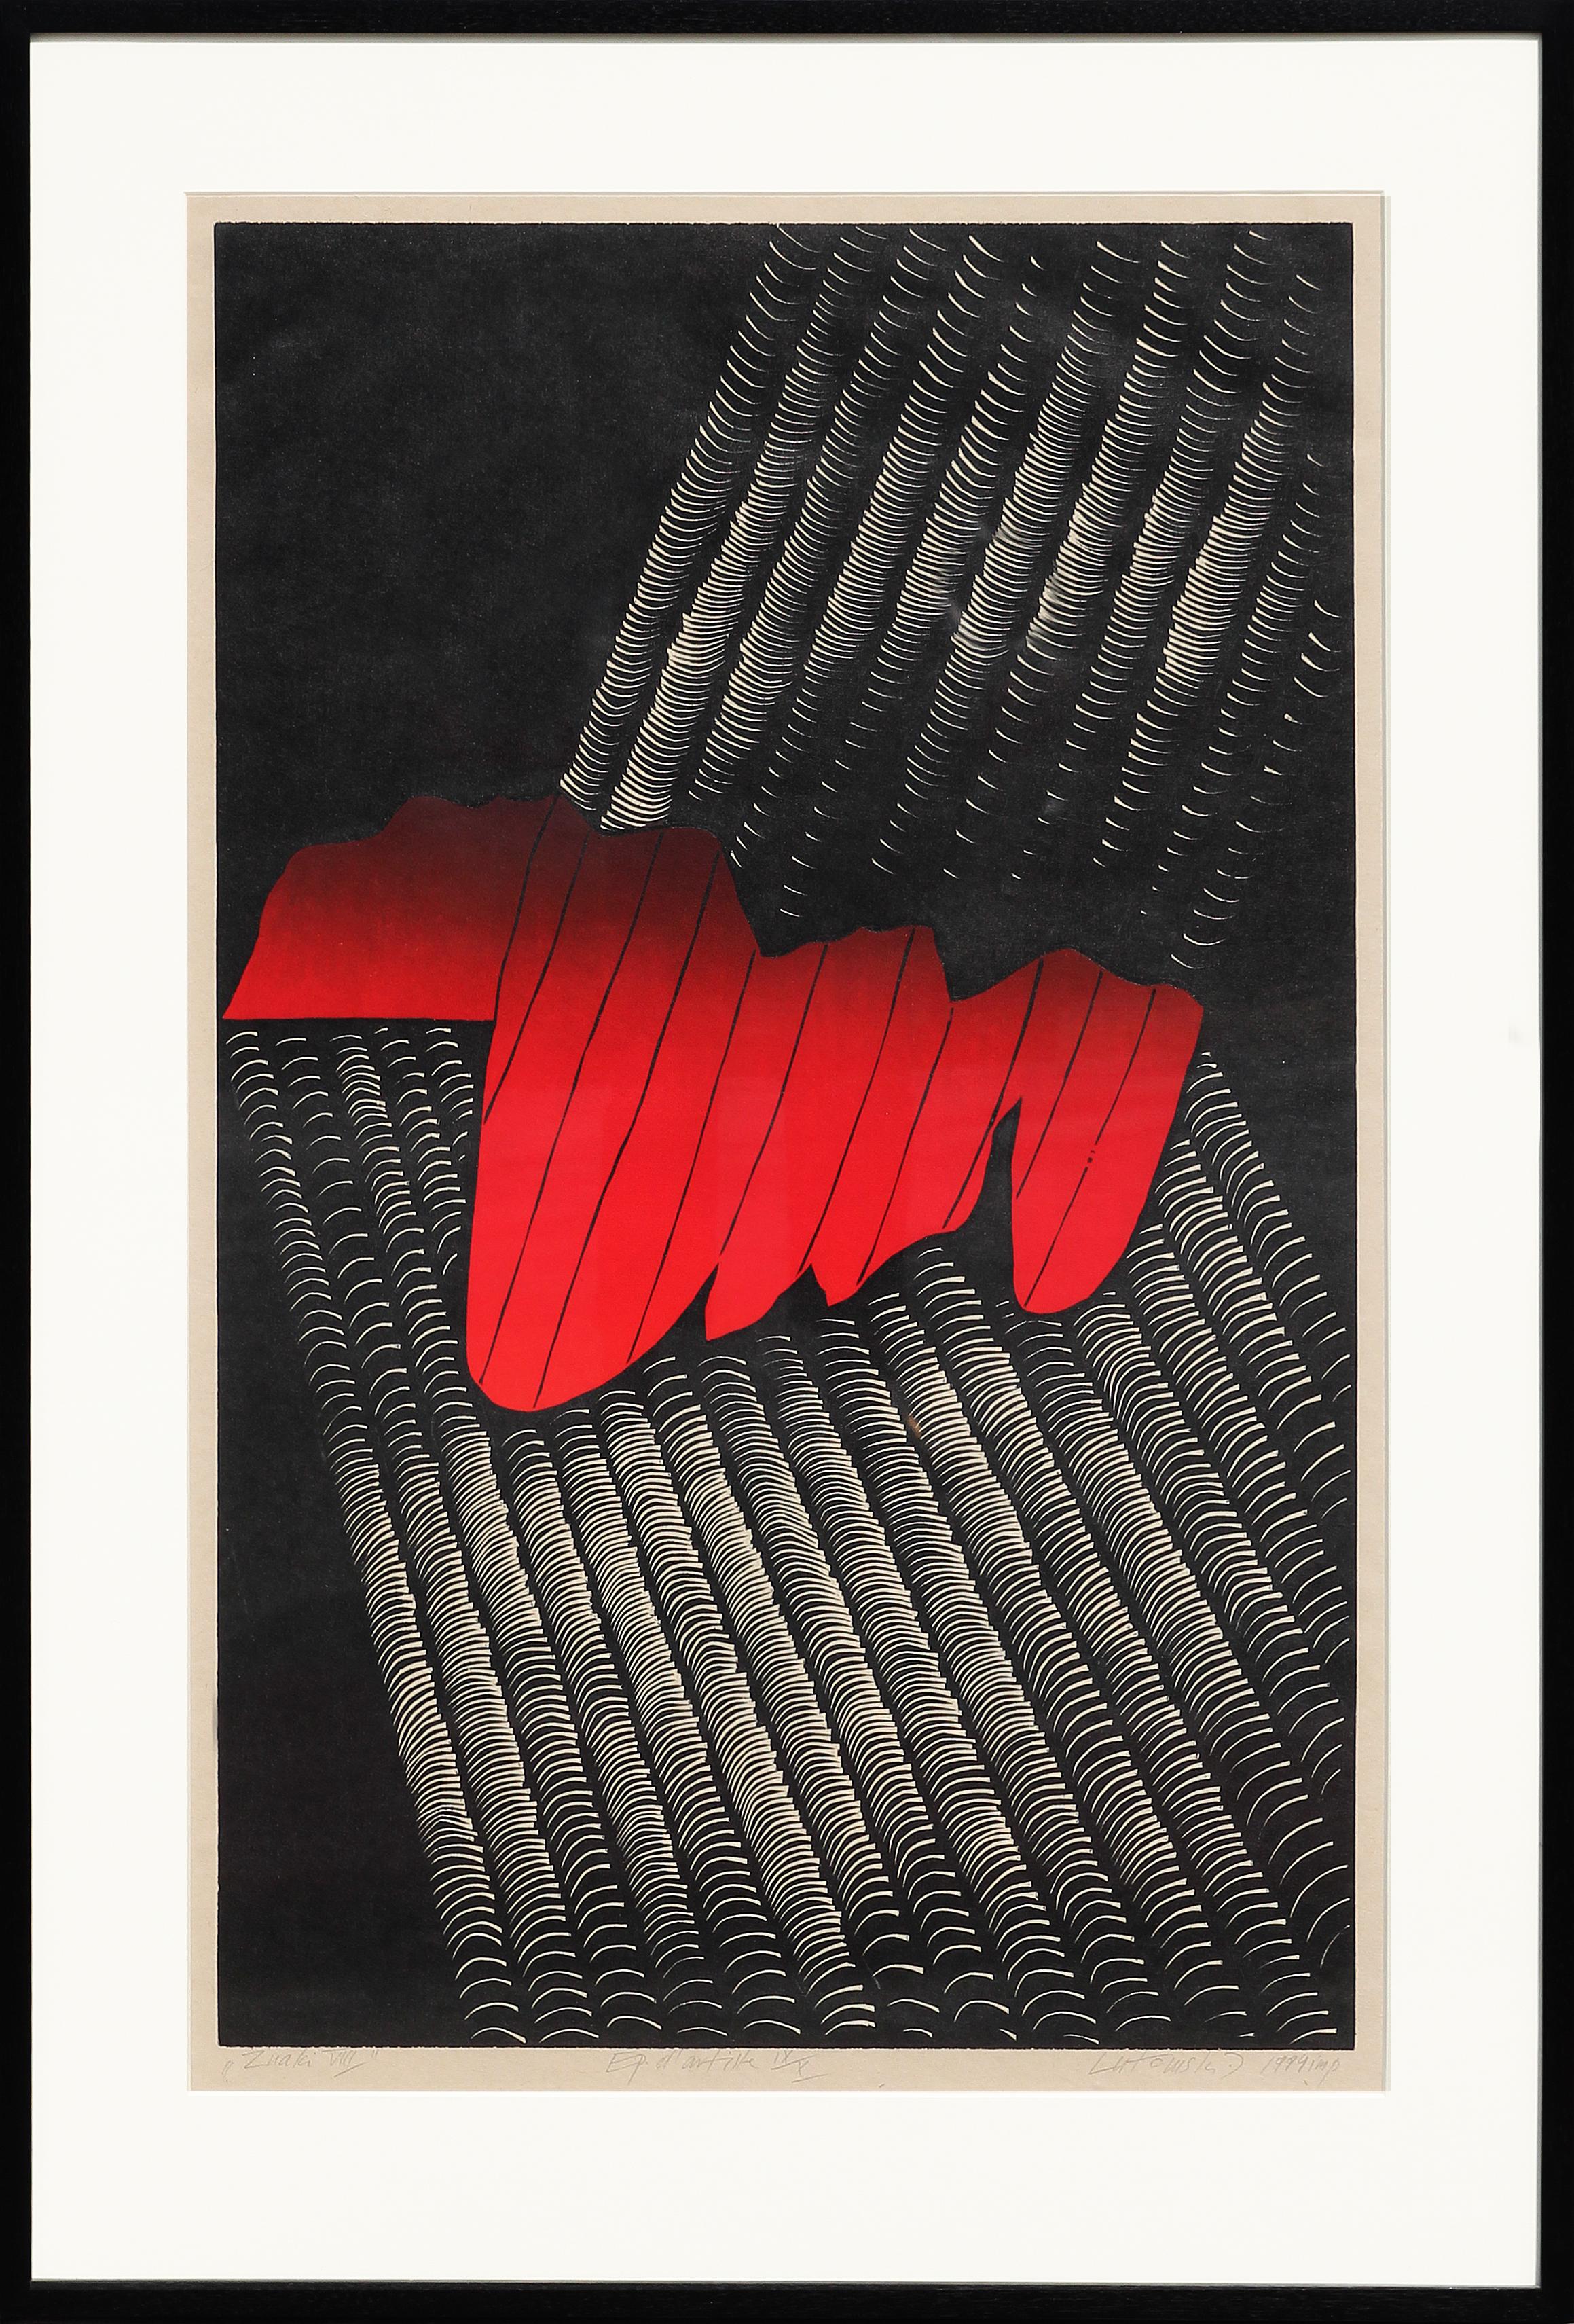 Zbigniew Lutomski Abstract Print - “Signs VIII” Red and Black Abstract Woodcut Print